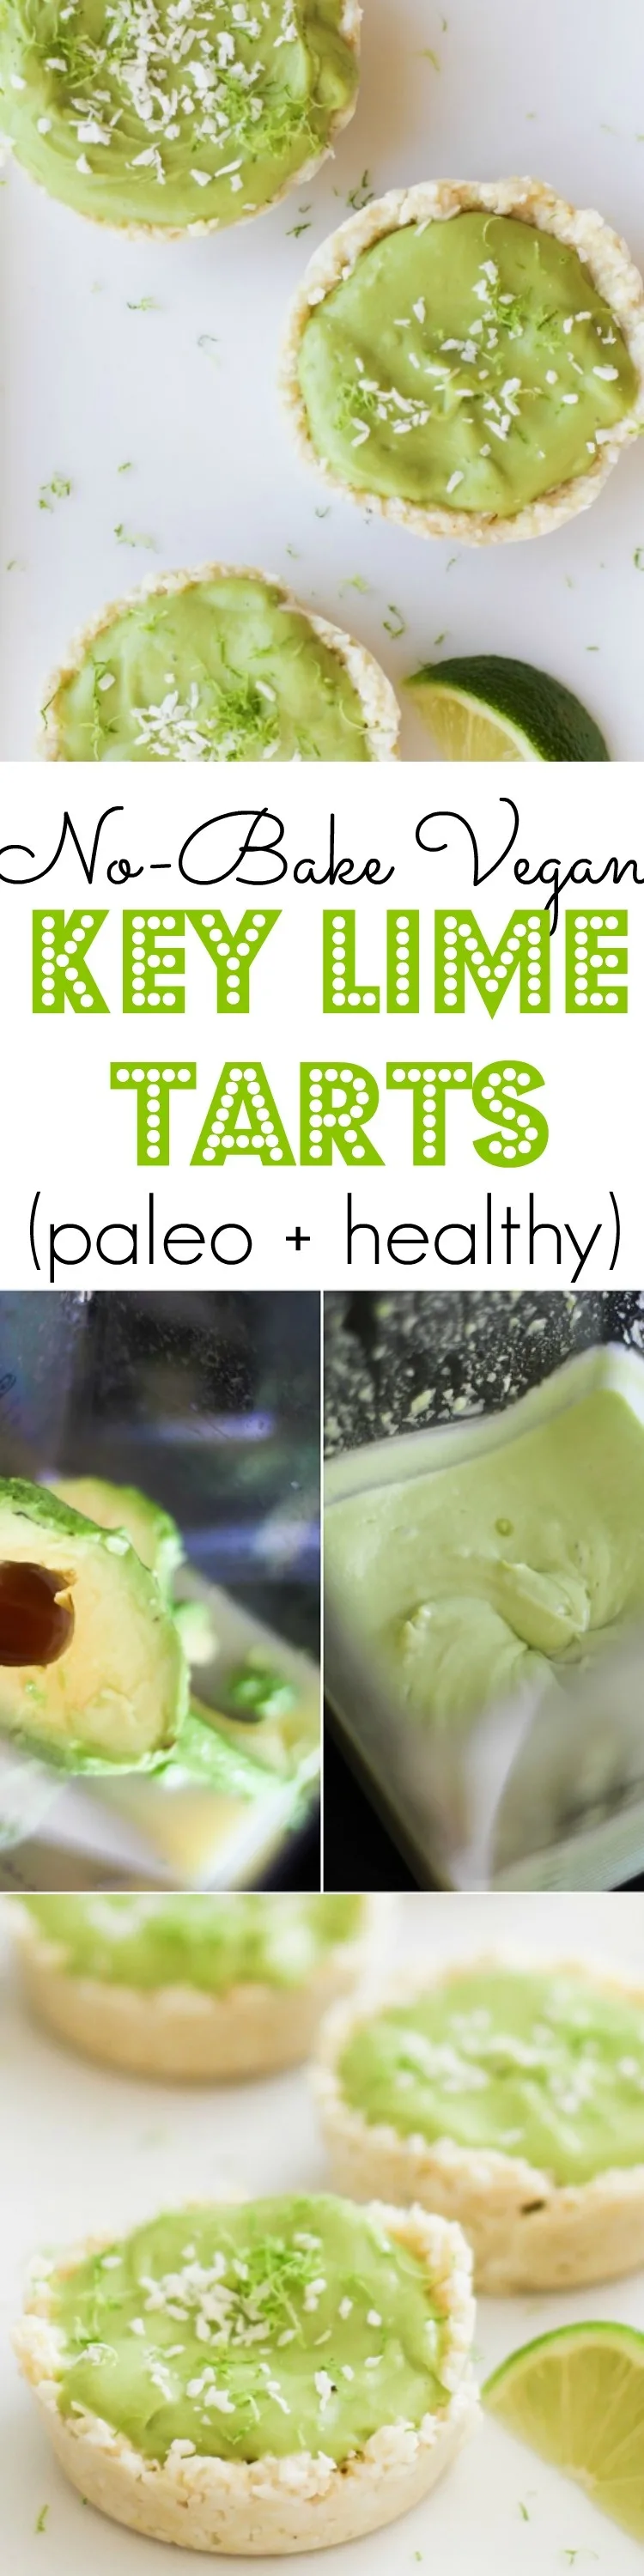 No-Bake Vegan Key Lime Tarts made with avocado, pure maple syrup and coconut oil | TheRoastedRoot.net #paleo #vegan #healthy #dessert